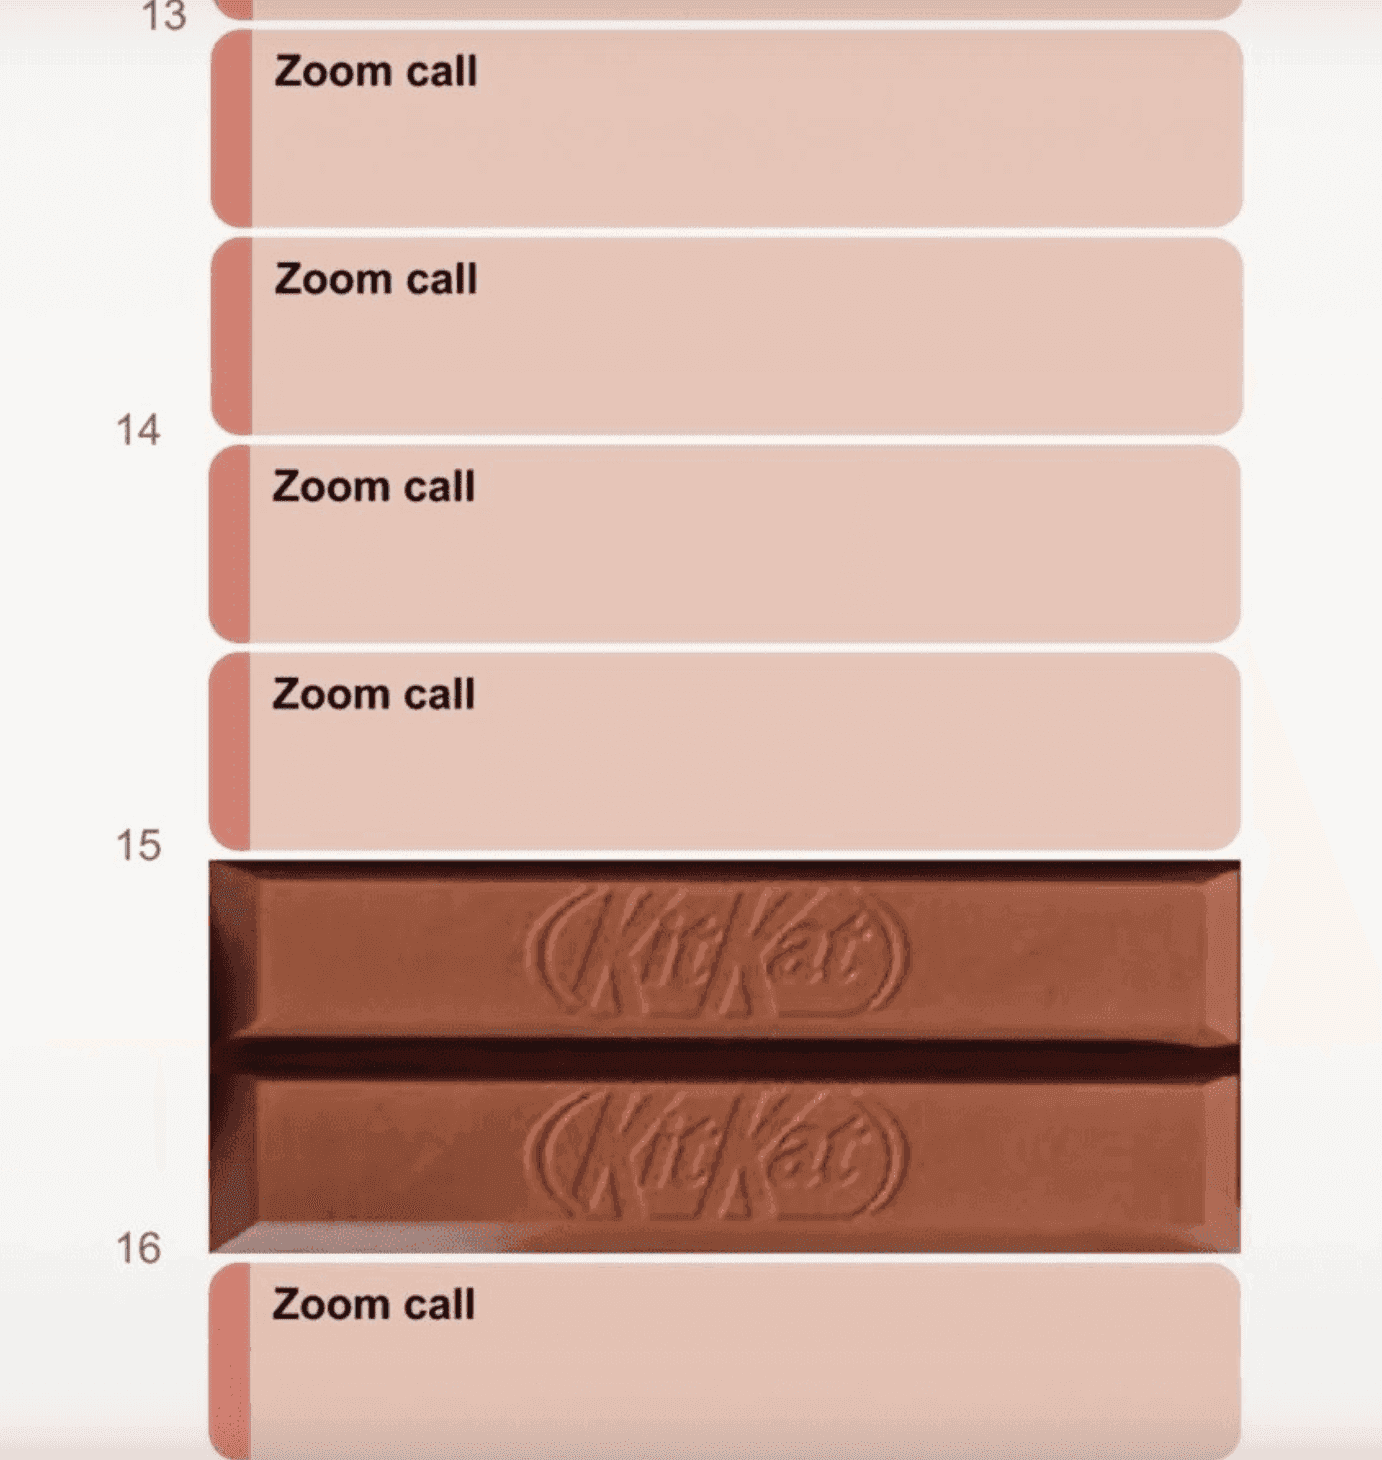 KitKat ad with Zoom call schedule but with two KitKat bars